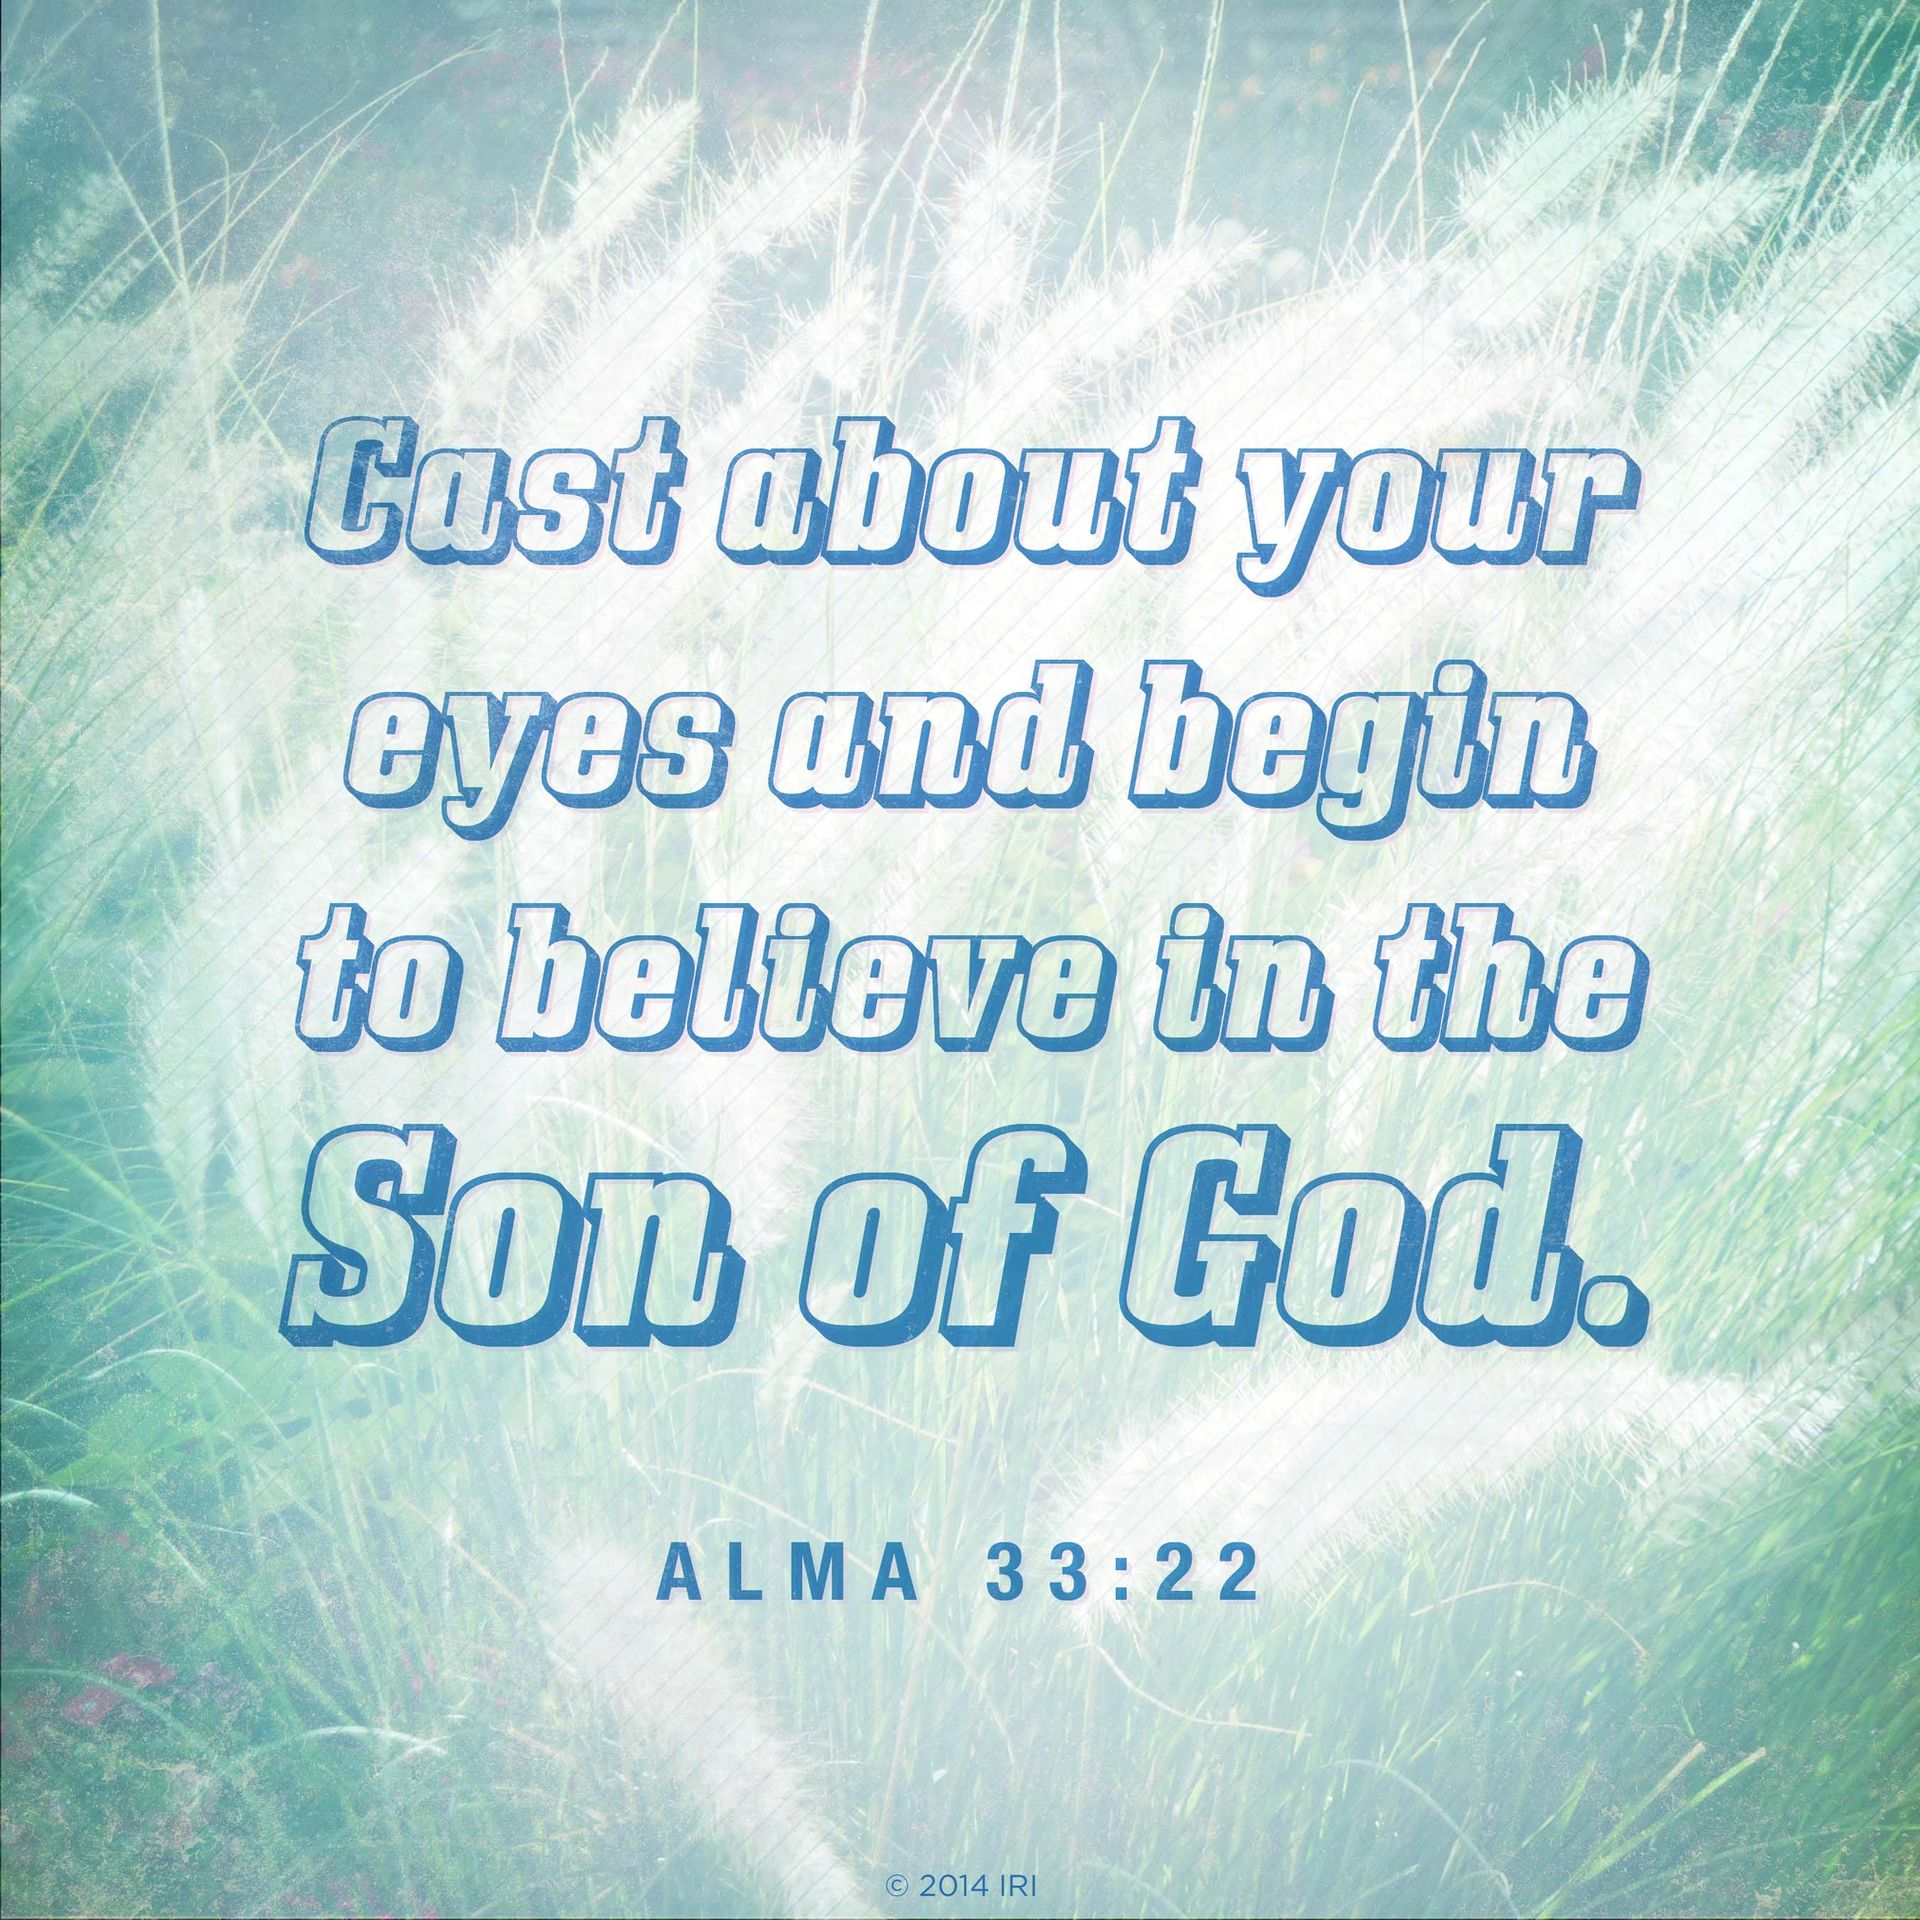 “Cast about your eyes and begin to believe in the Son of God.”—Alma 33:22